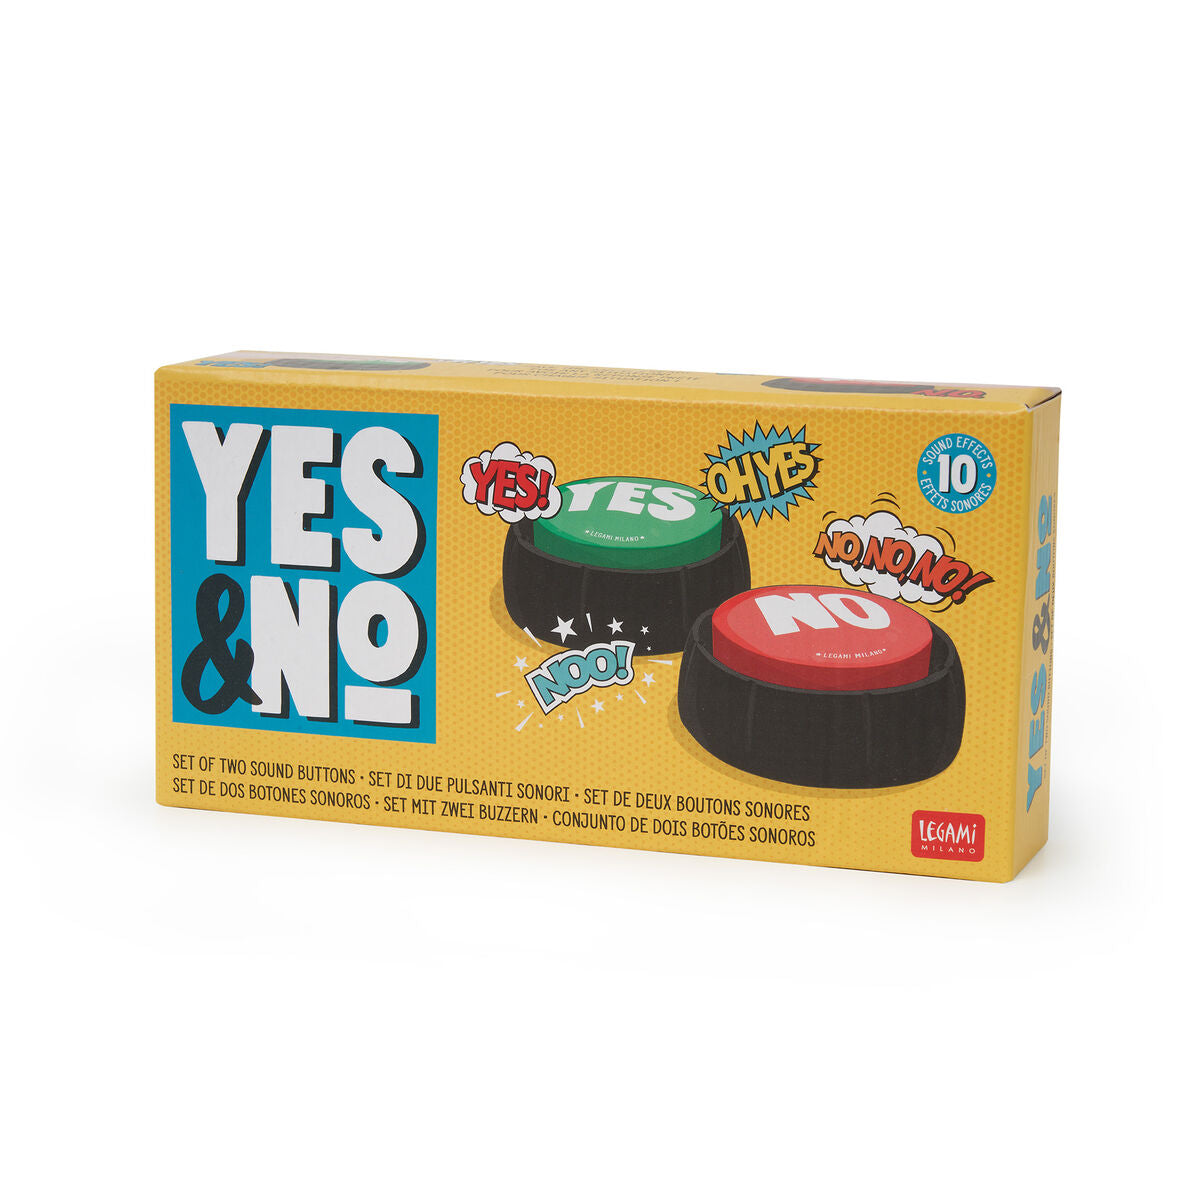 Gift | Legami Yes & No Set of two sound buttons by Weirs of Baggot St